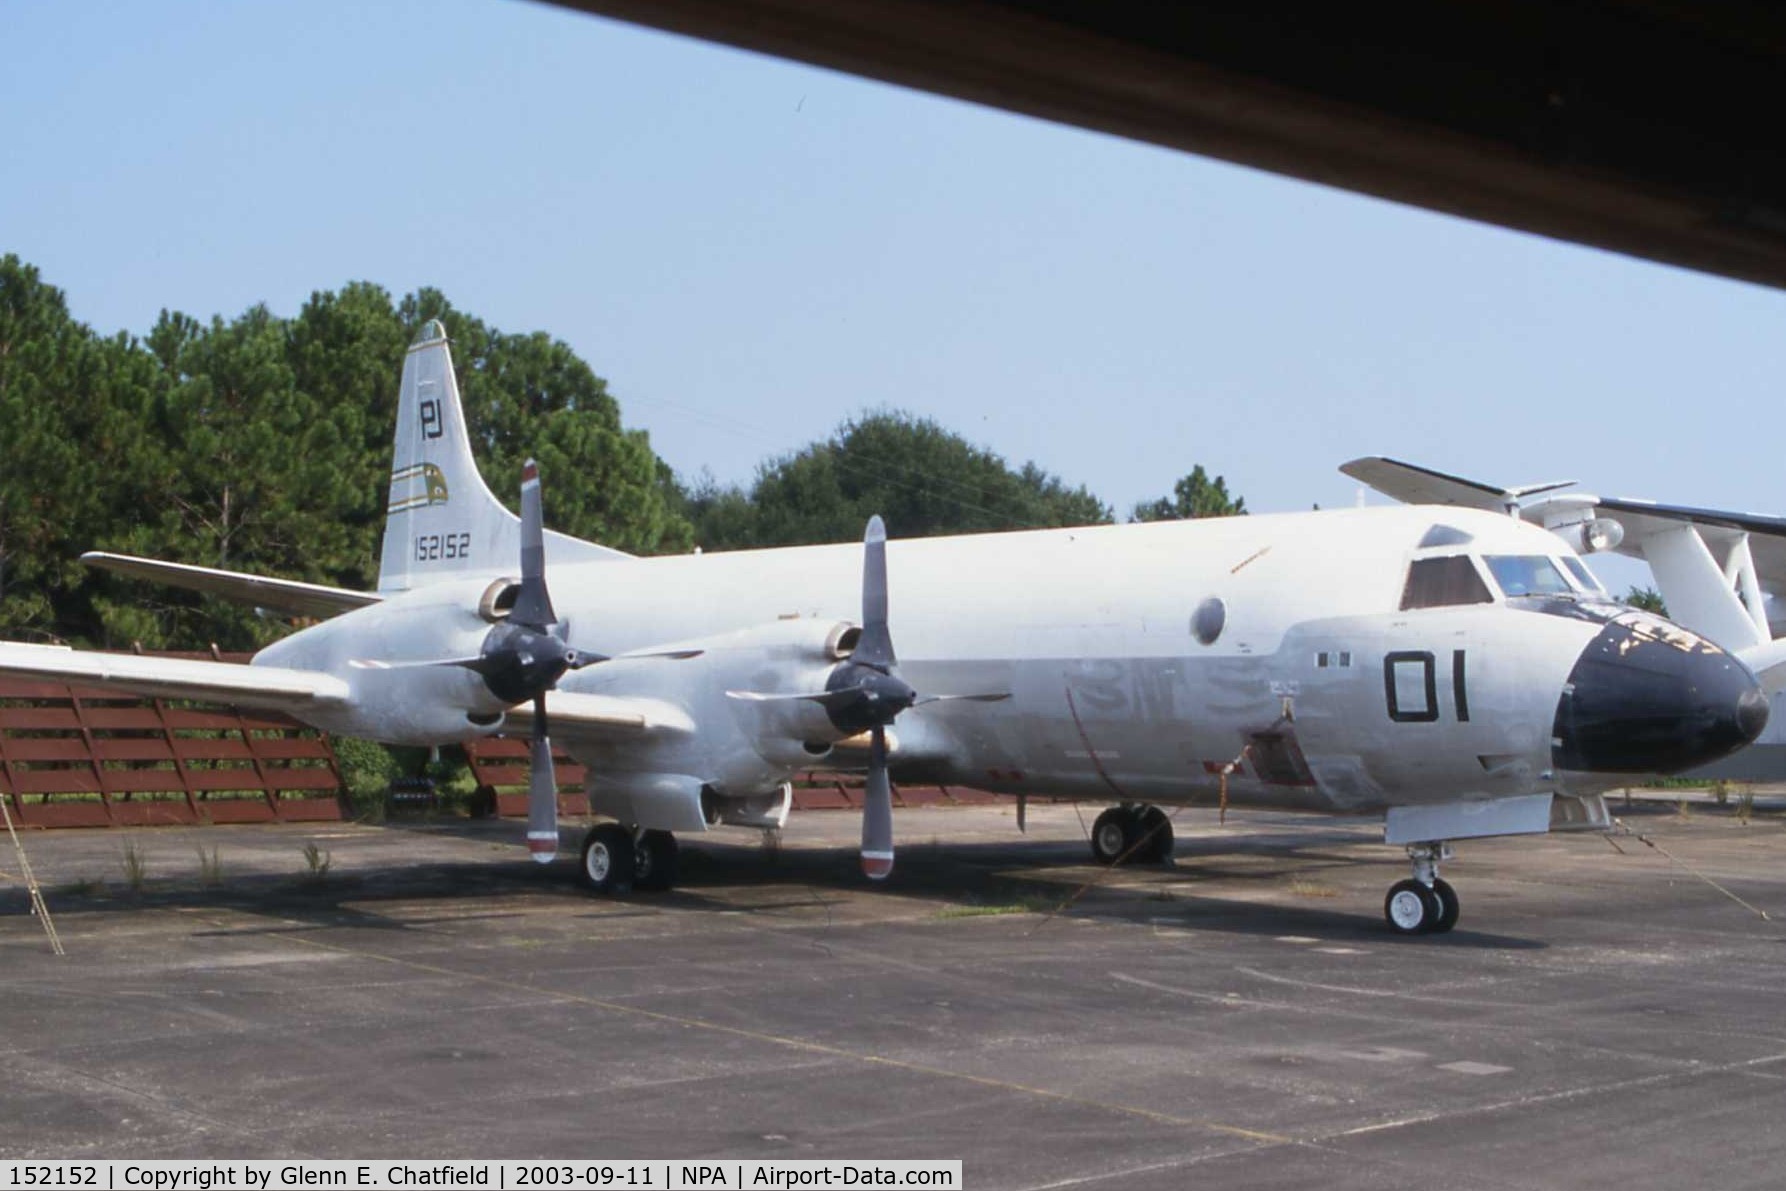 152152, Lockheed P-3A-50-LO Orion C/N 185-5122, P-3A at the National Museum of Naval Aviation